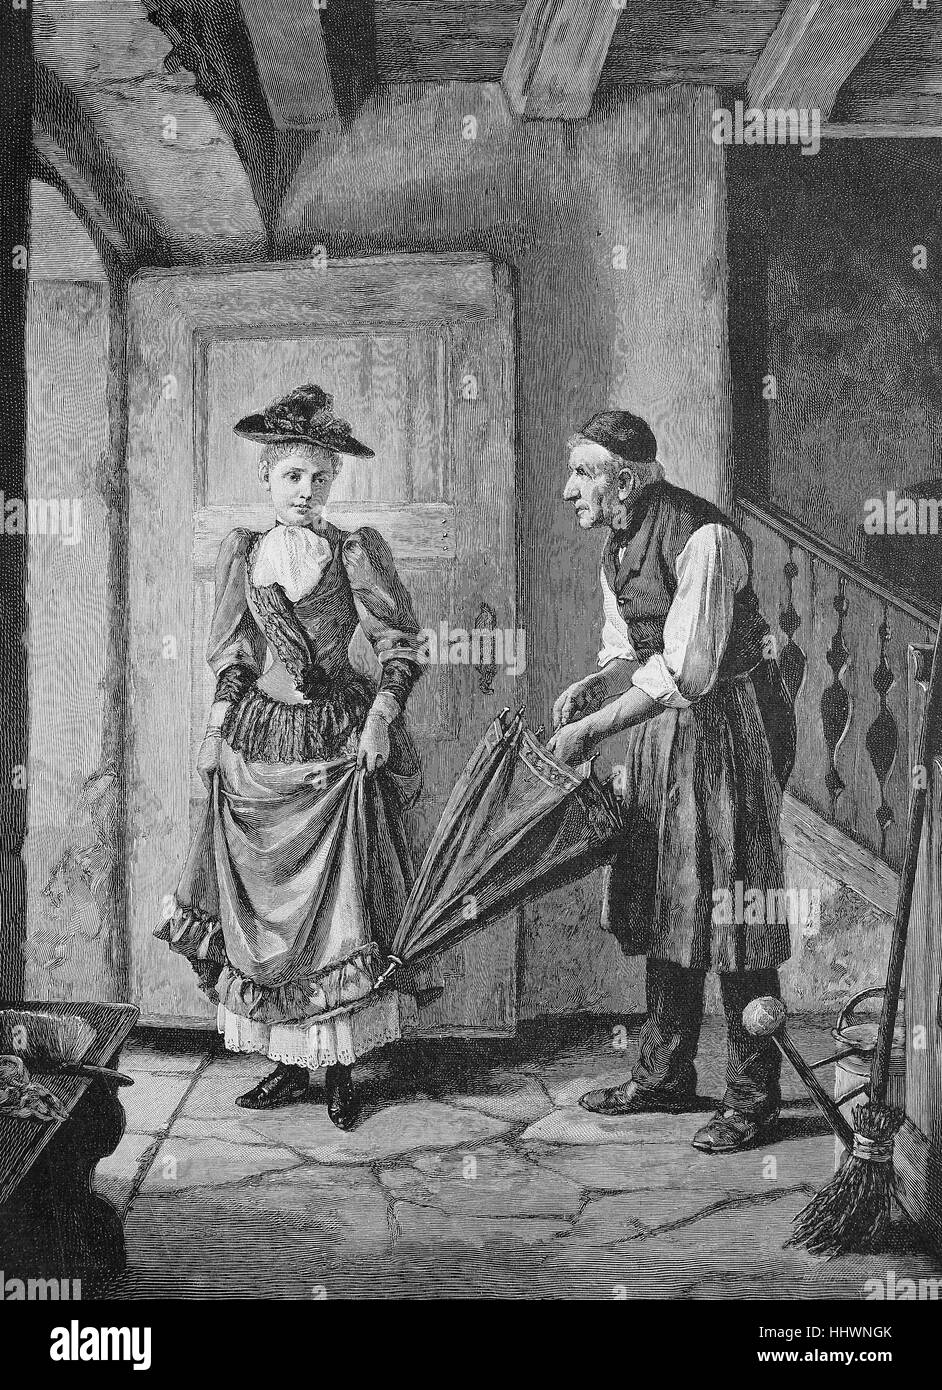 Disguised protection, old man offers an umbrella to a young woman, according to a painting by Marc Louis Benjamin Vautier in the Chronicle of 1894, Germany, historical image or illustration, published 1890, digital improved Stock Photo